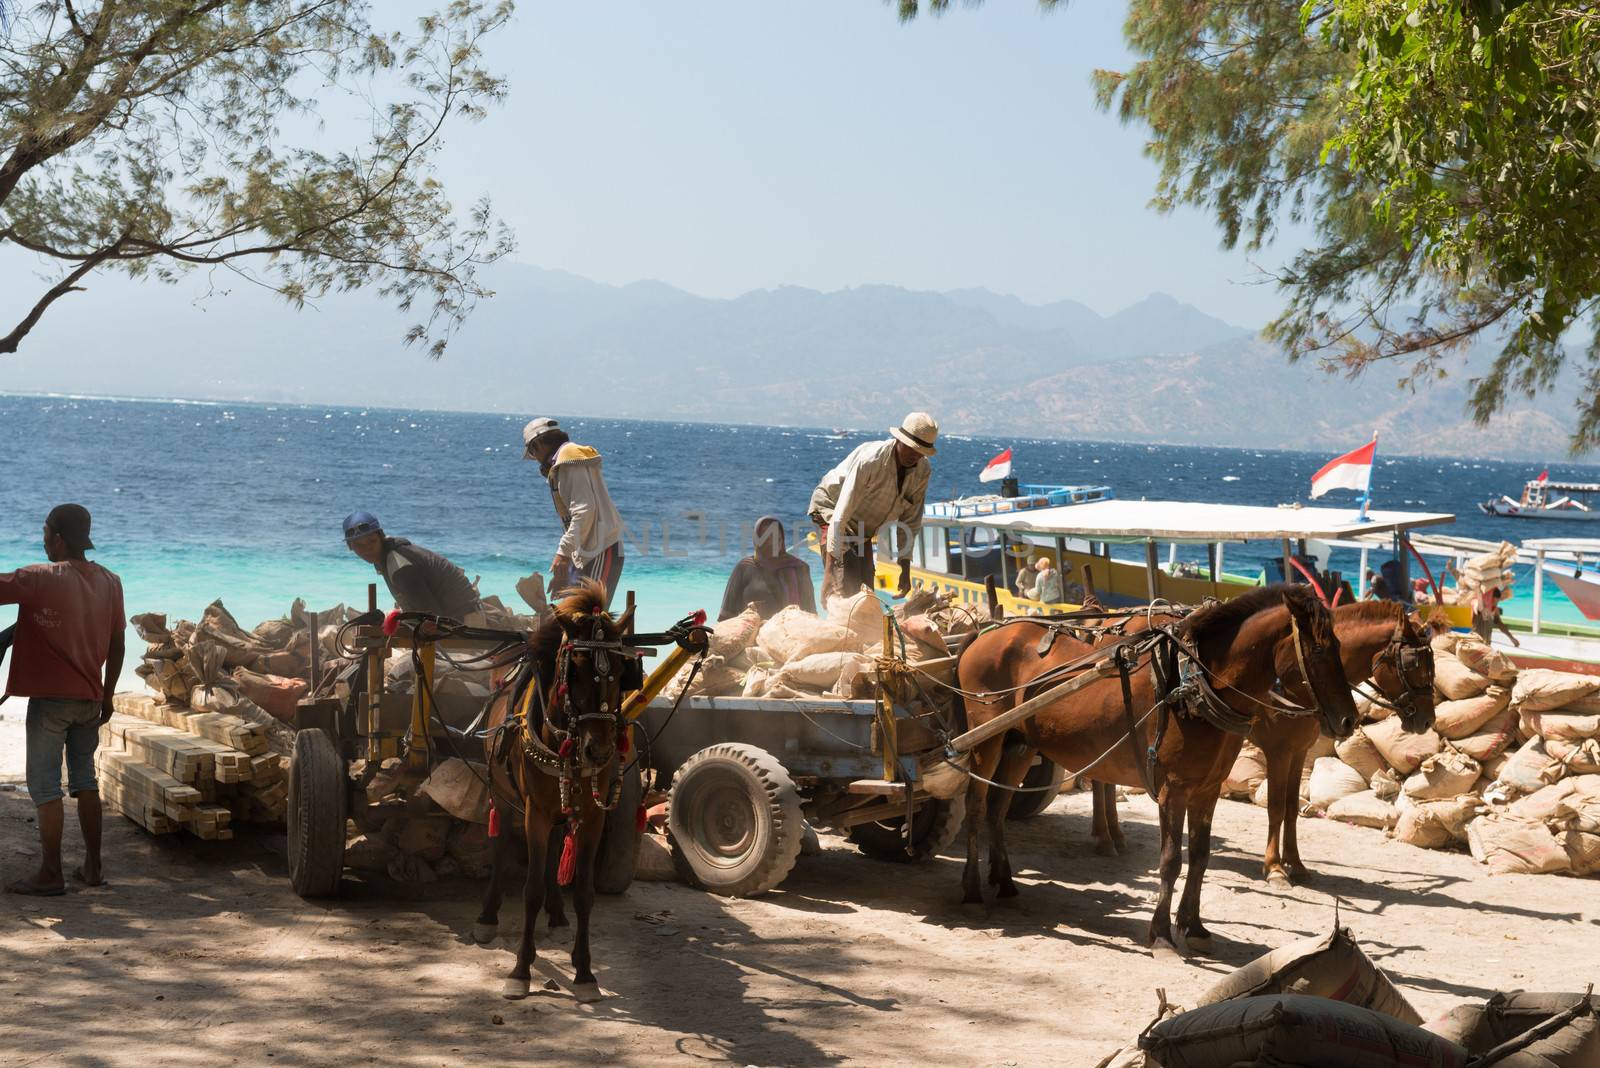 GILI TRAWANGAN, INDONESIA - SEP 15: Cement  loading on horse carriages on Sep 15,2012 in Gili Trawangan island, Indonesia. On the small island there are no any transport but horse carriage. 